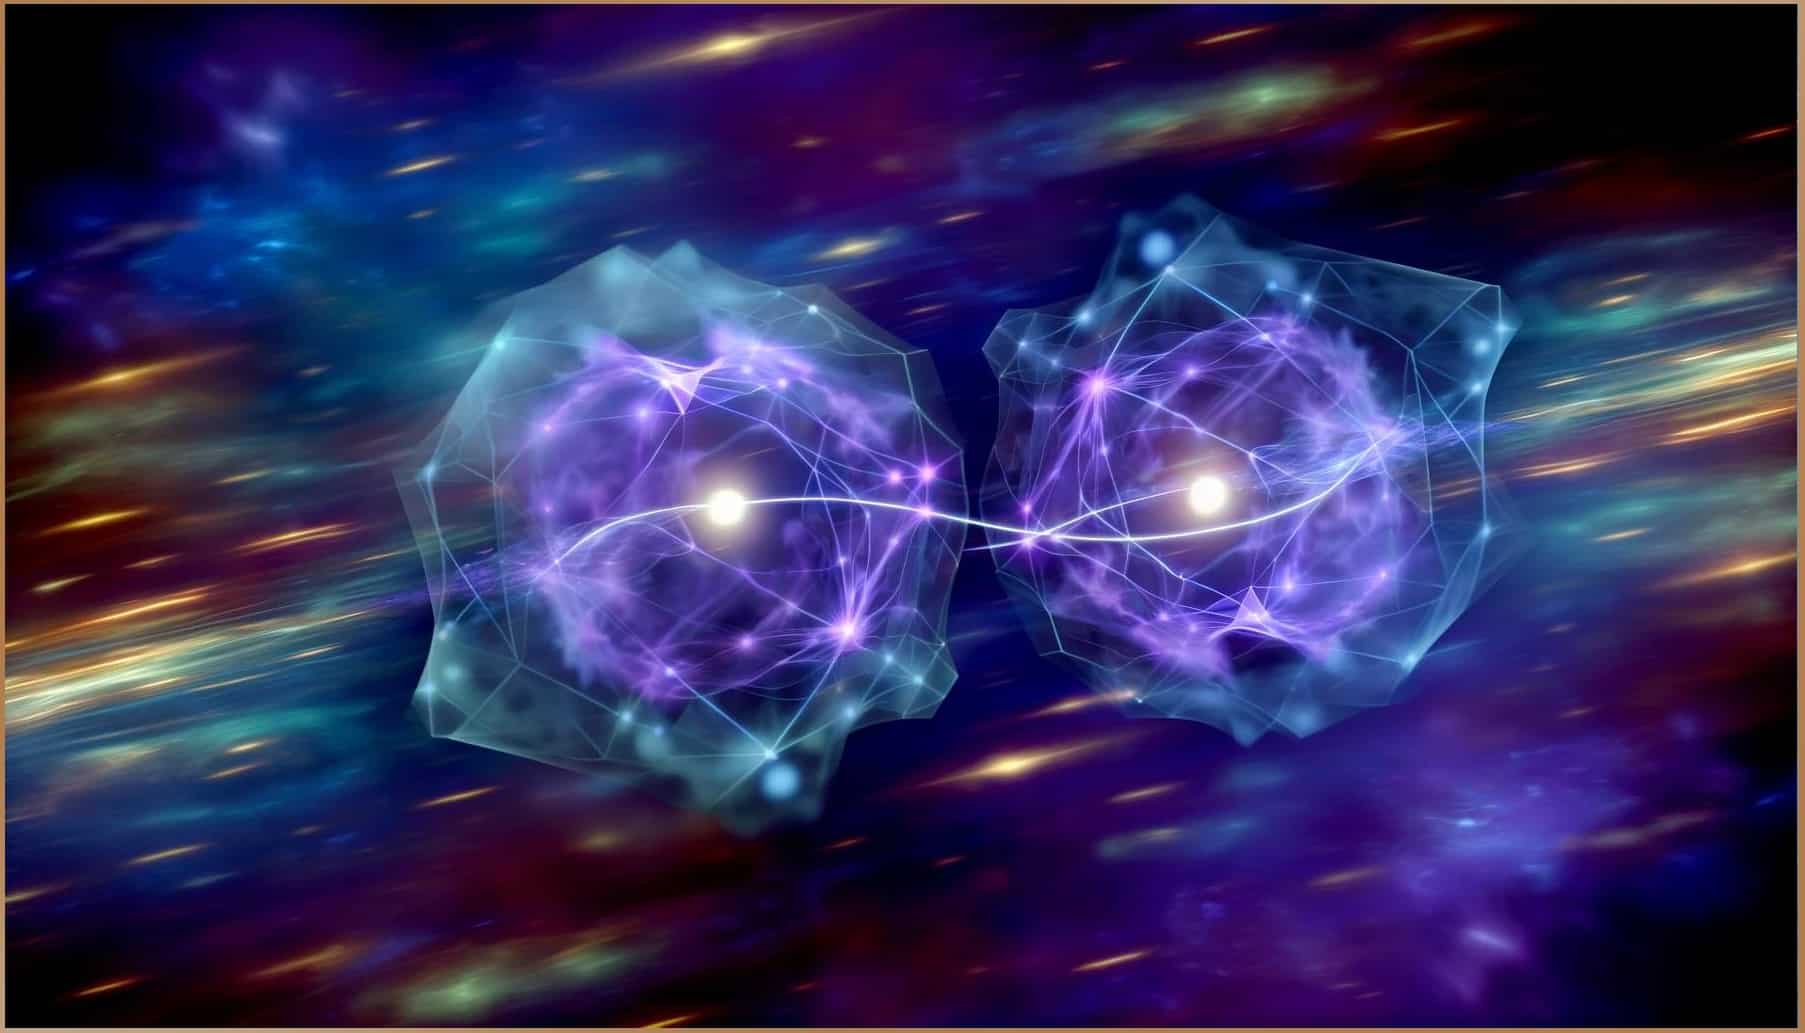 Digital art depiction of quantum entanglement with intertwined geometric shapes amidst a dynamic, colorful cosmic background.